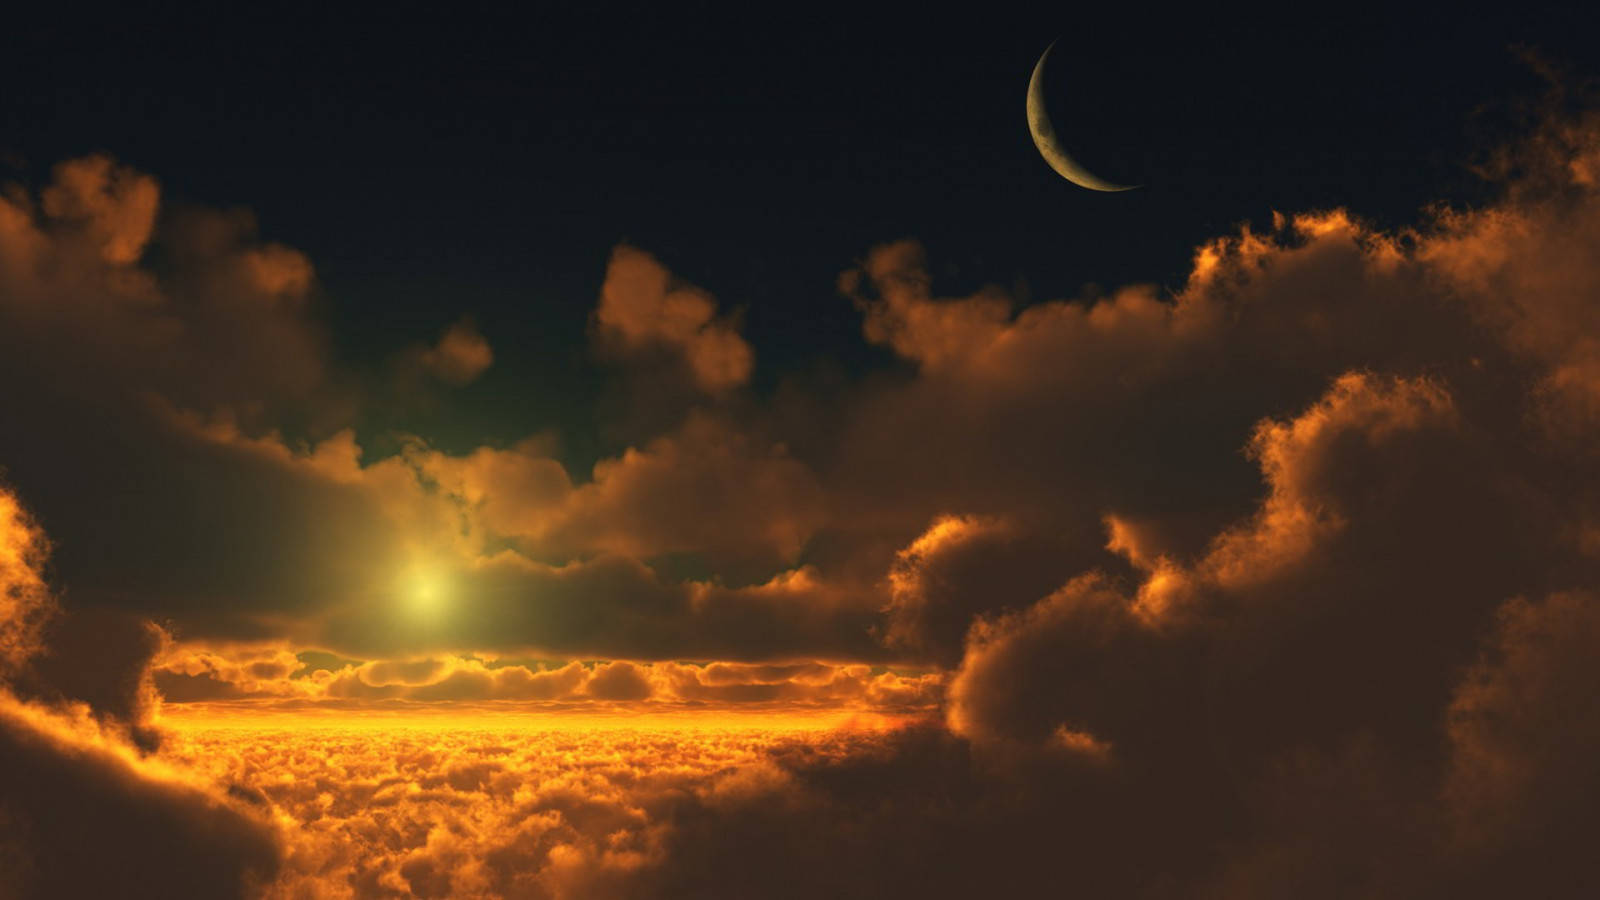 Sun And Moon With Clouds Wallpaper